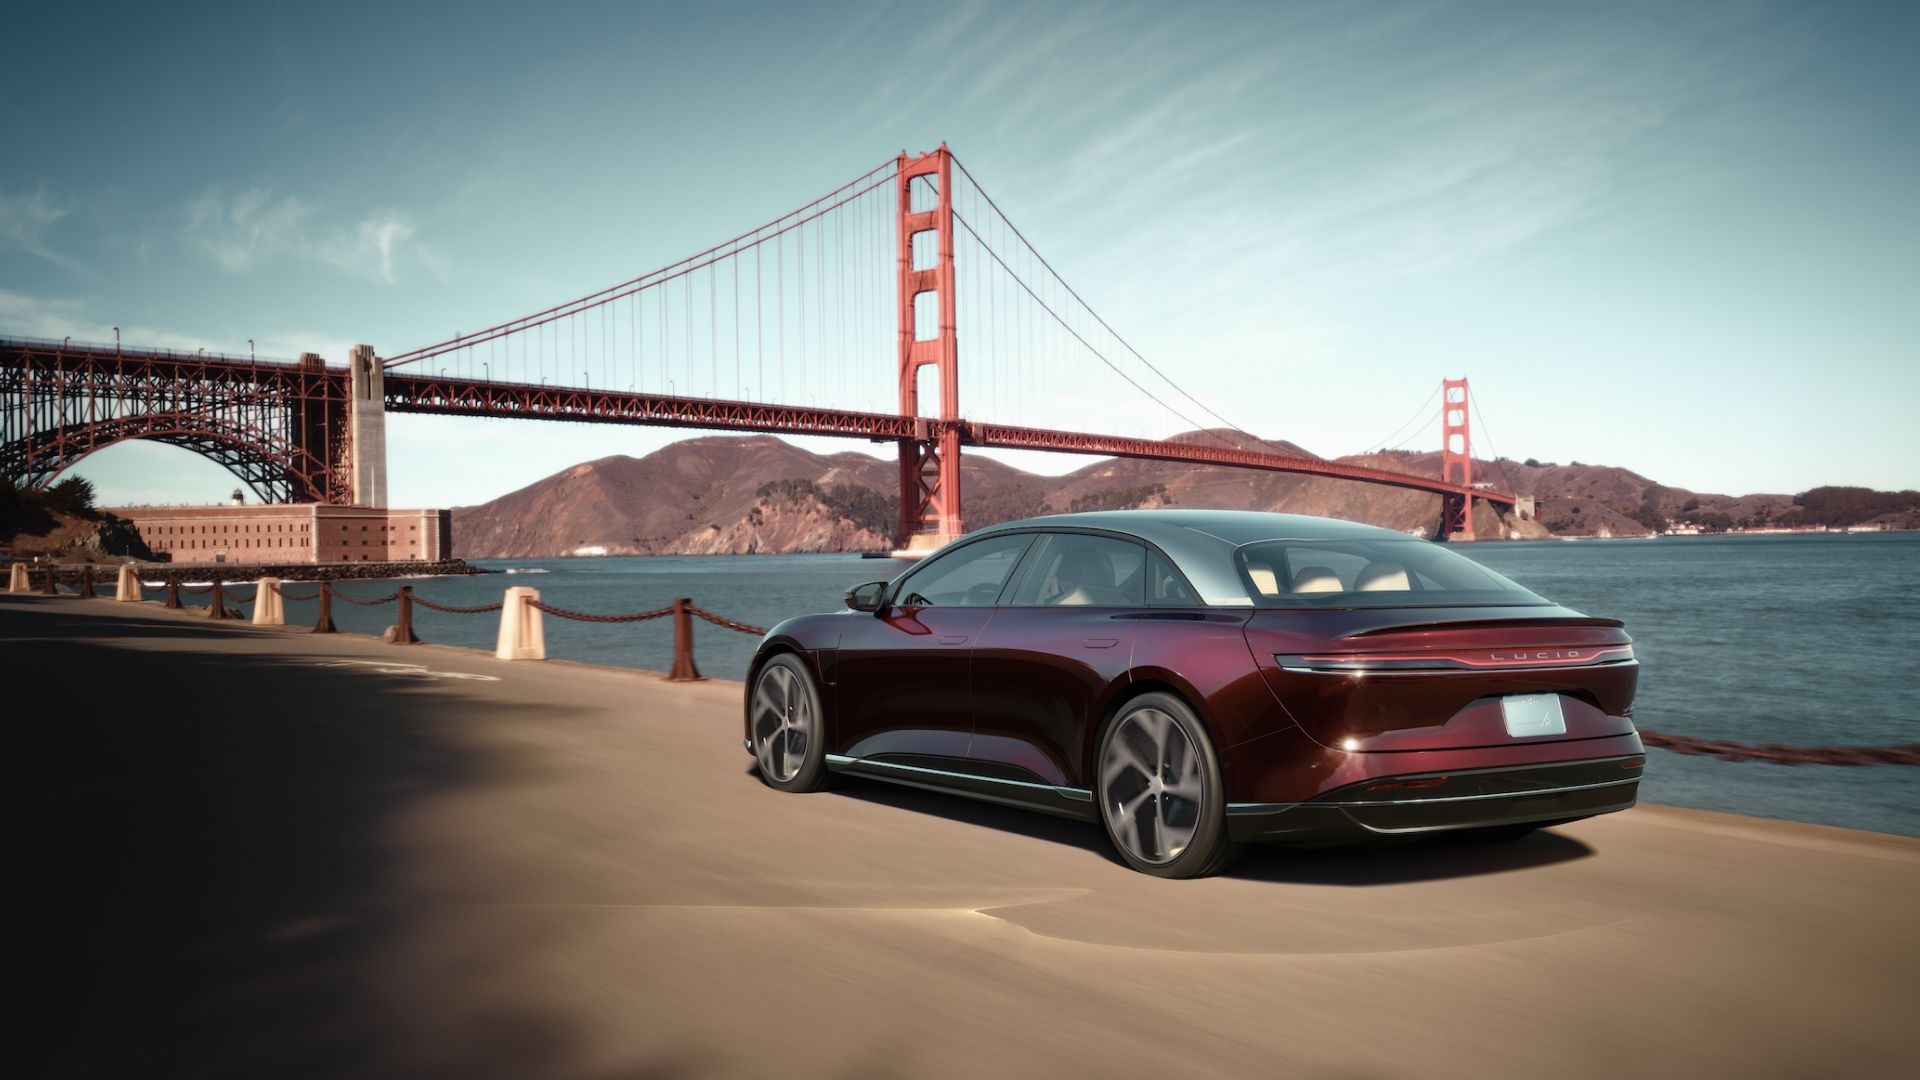 Lucid Motors Auto, Luxury electric car, Next-level performance, Sustainable mobility, 1920x1080 Full HD Desktop